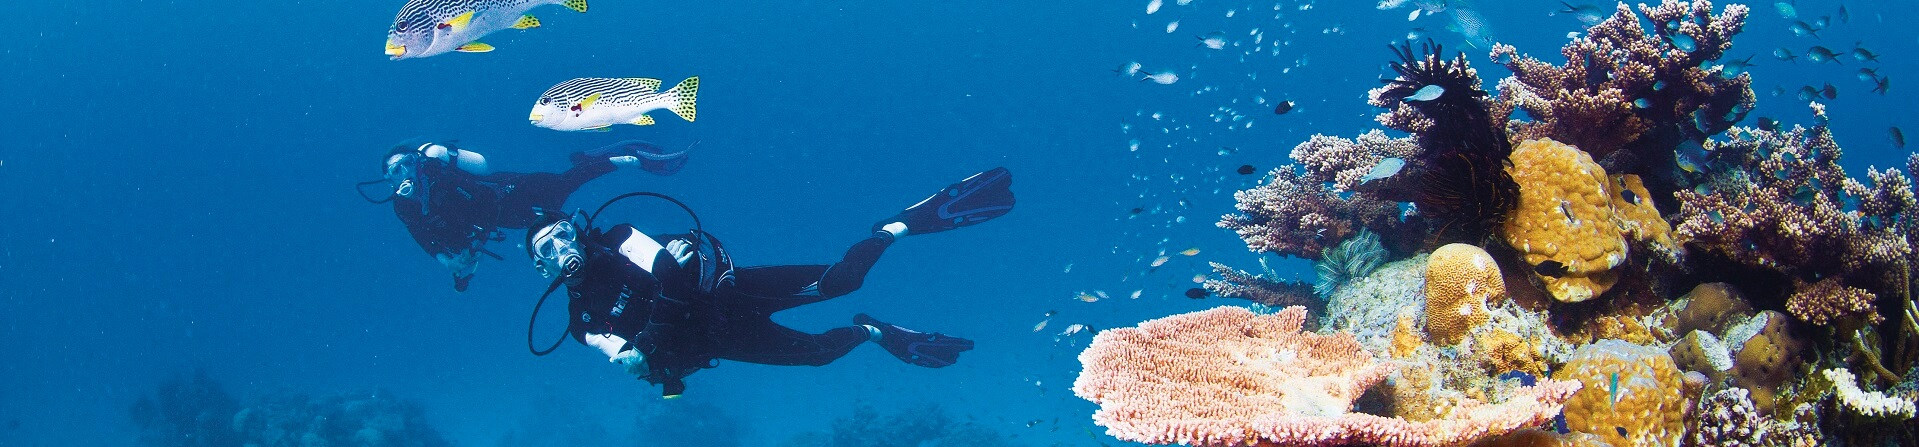 How old do you have to be to scuba dive in the Great Barrier Reef?